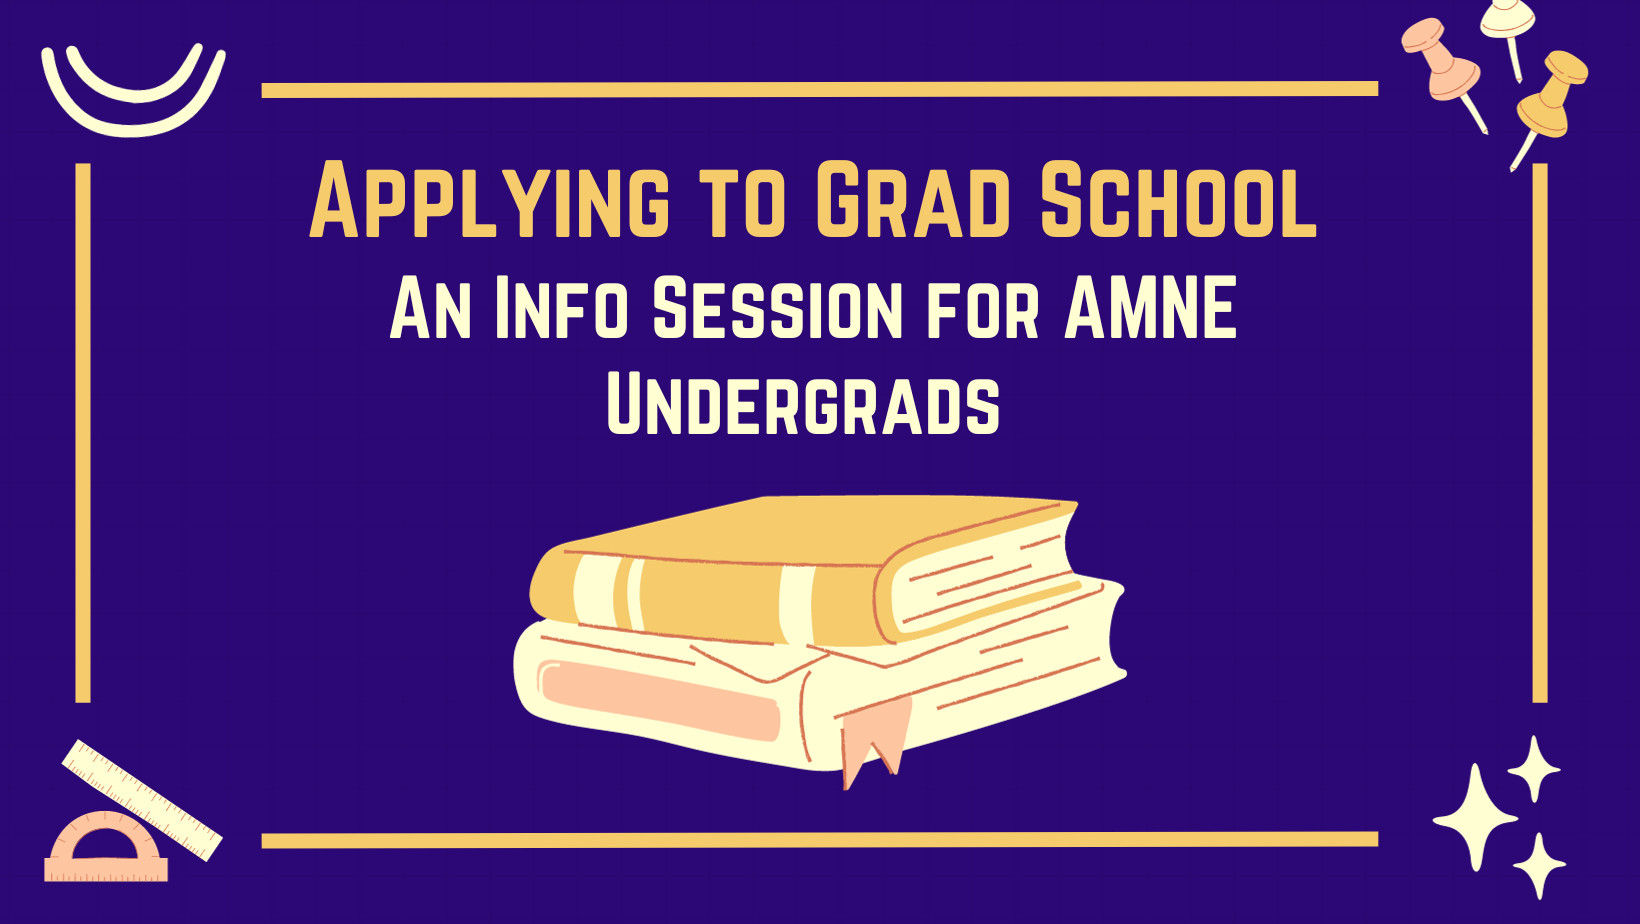 Applying to Grad School: An Info Session for AMNE Undergrads